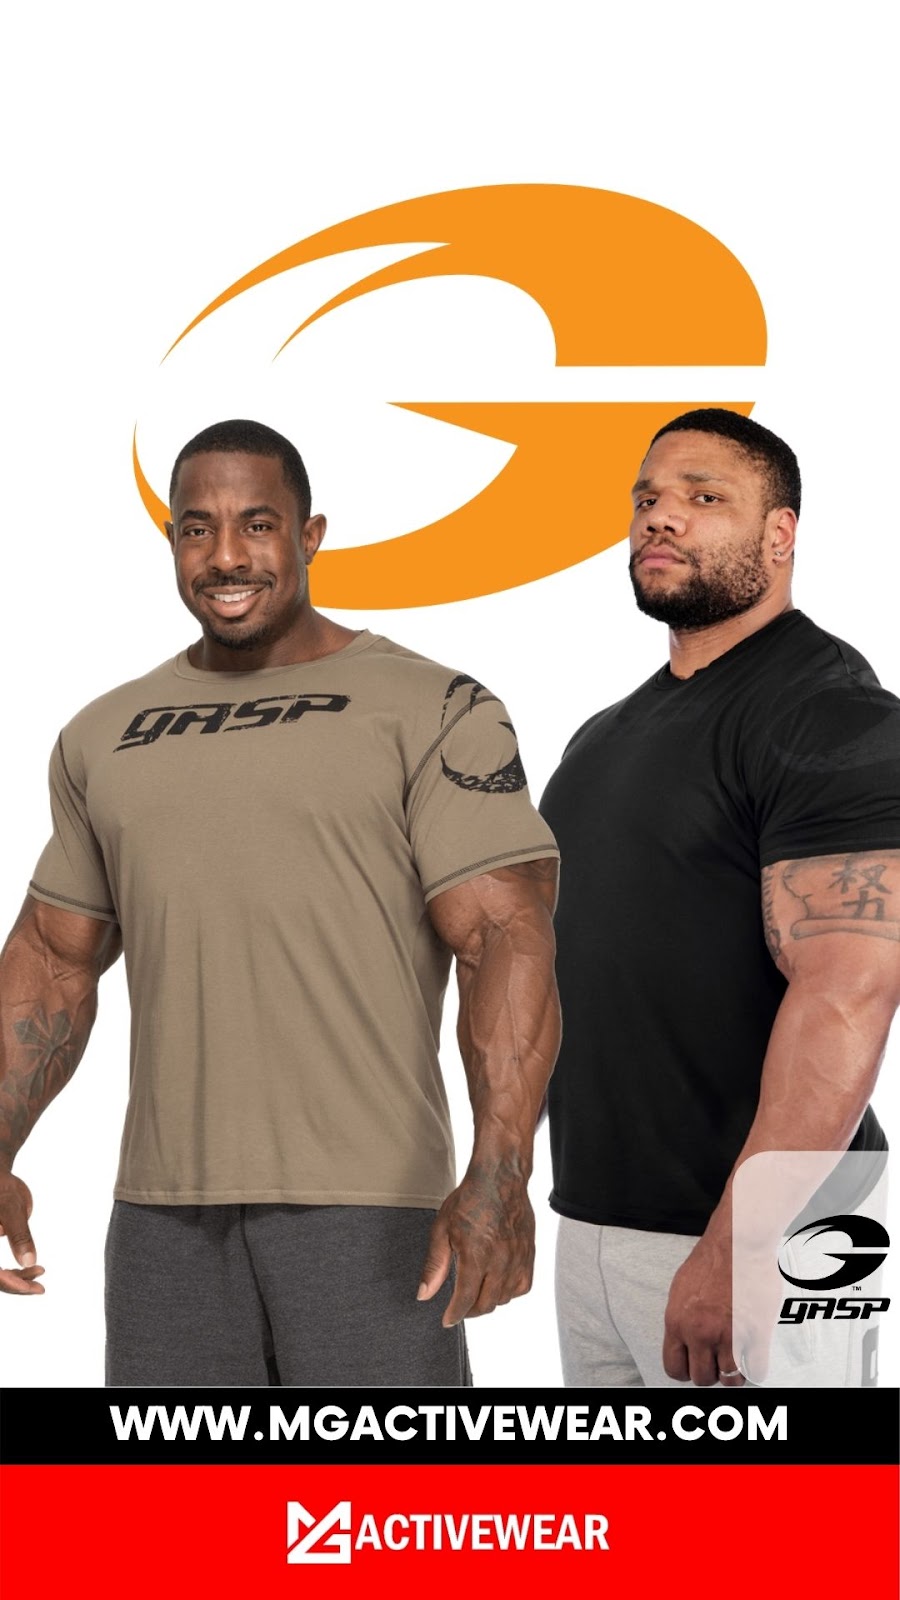 GASP OFFICIAL Latest Gym Wear Collection in UAE | MG ACTIVEWEAR - PRO